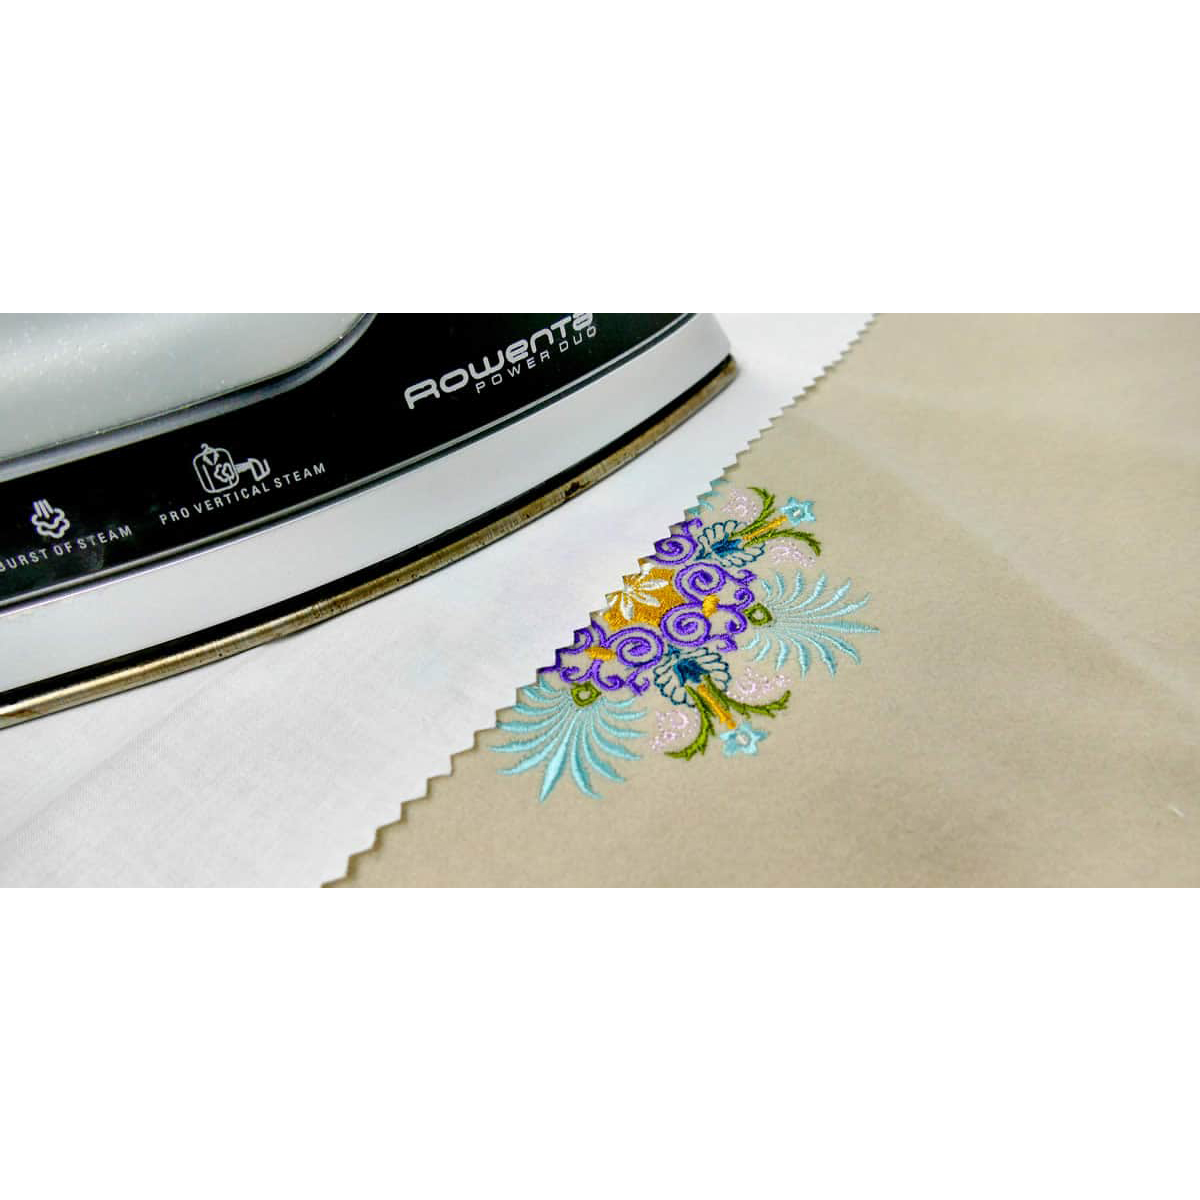 Floriani Pressing Cloth - for ironing your sewing and embroidery